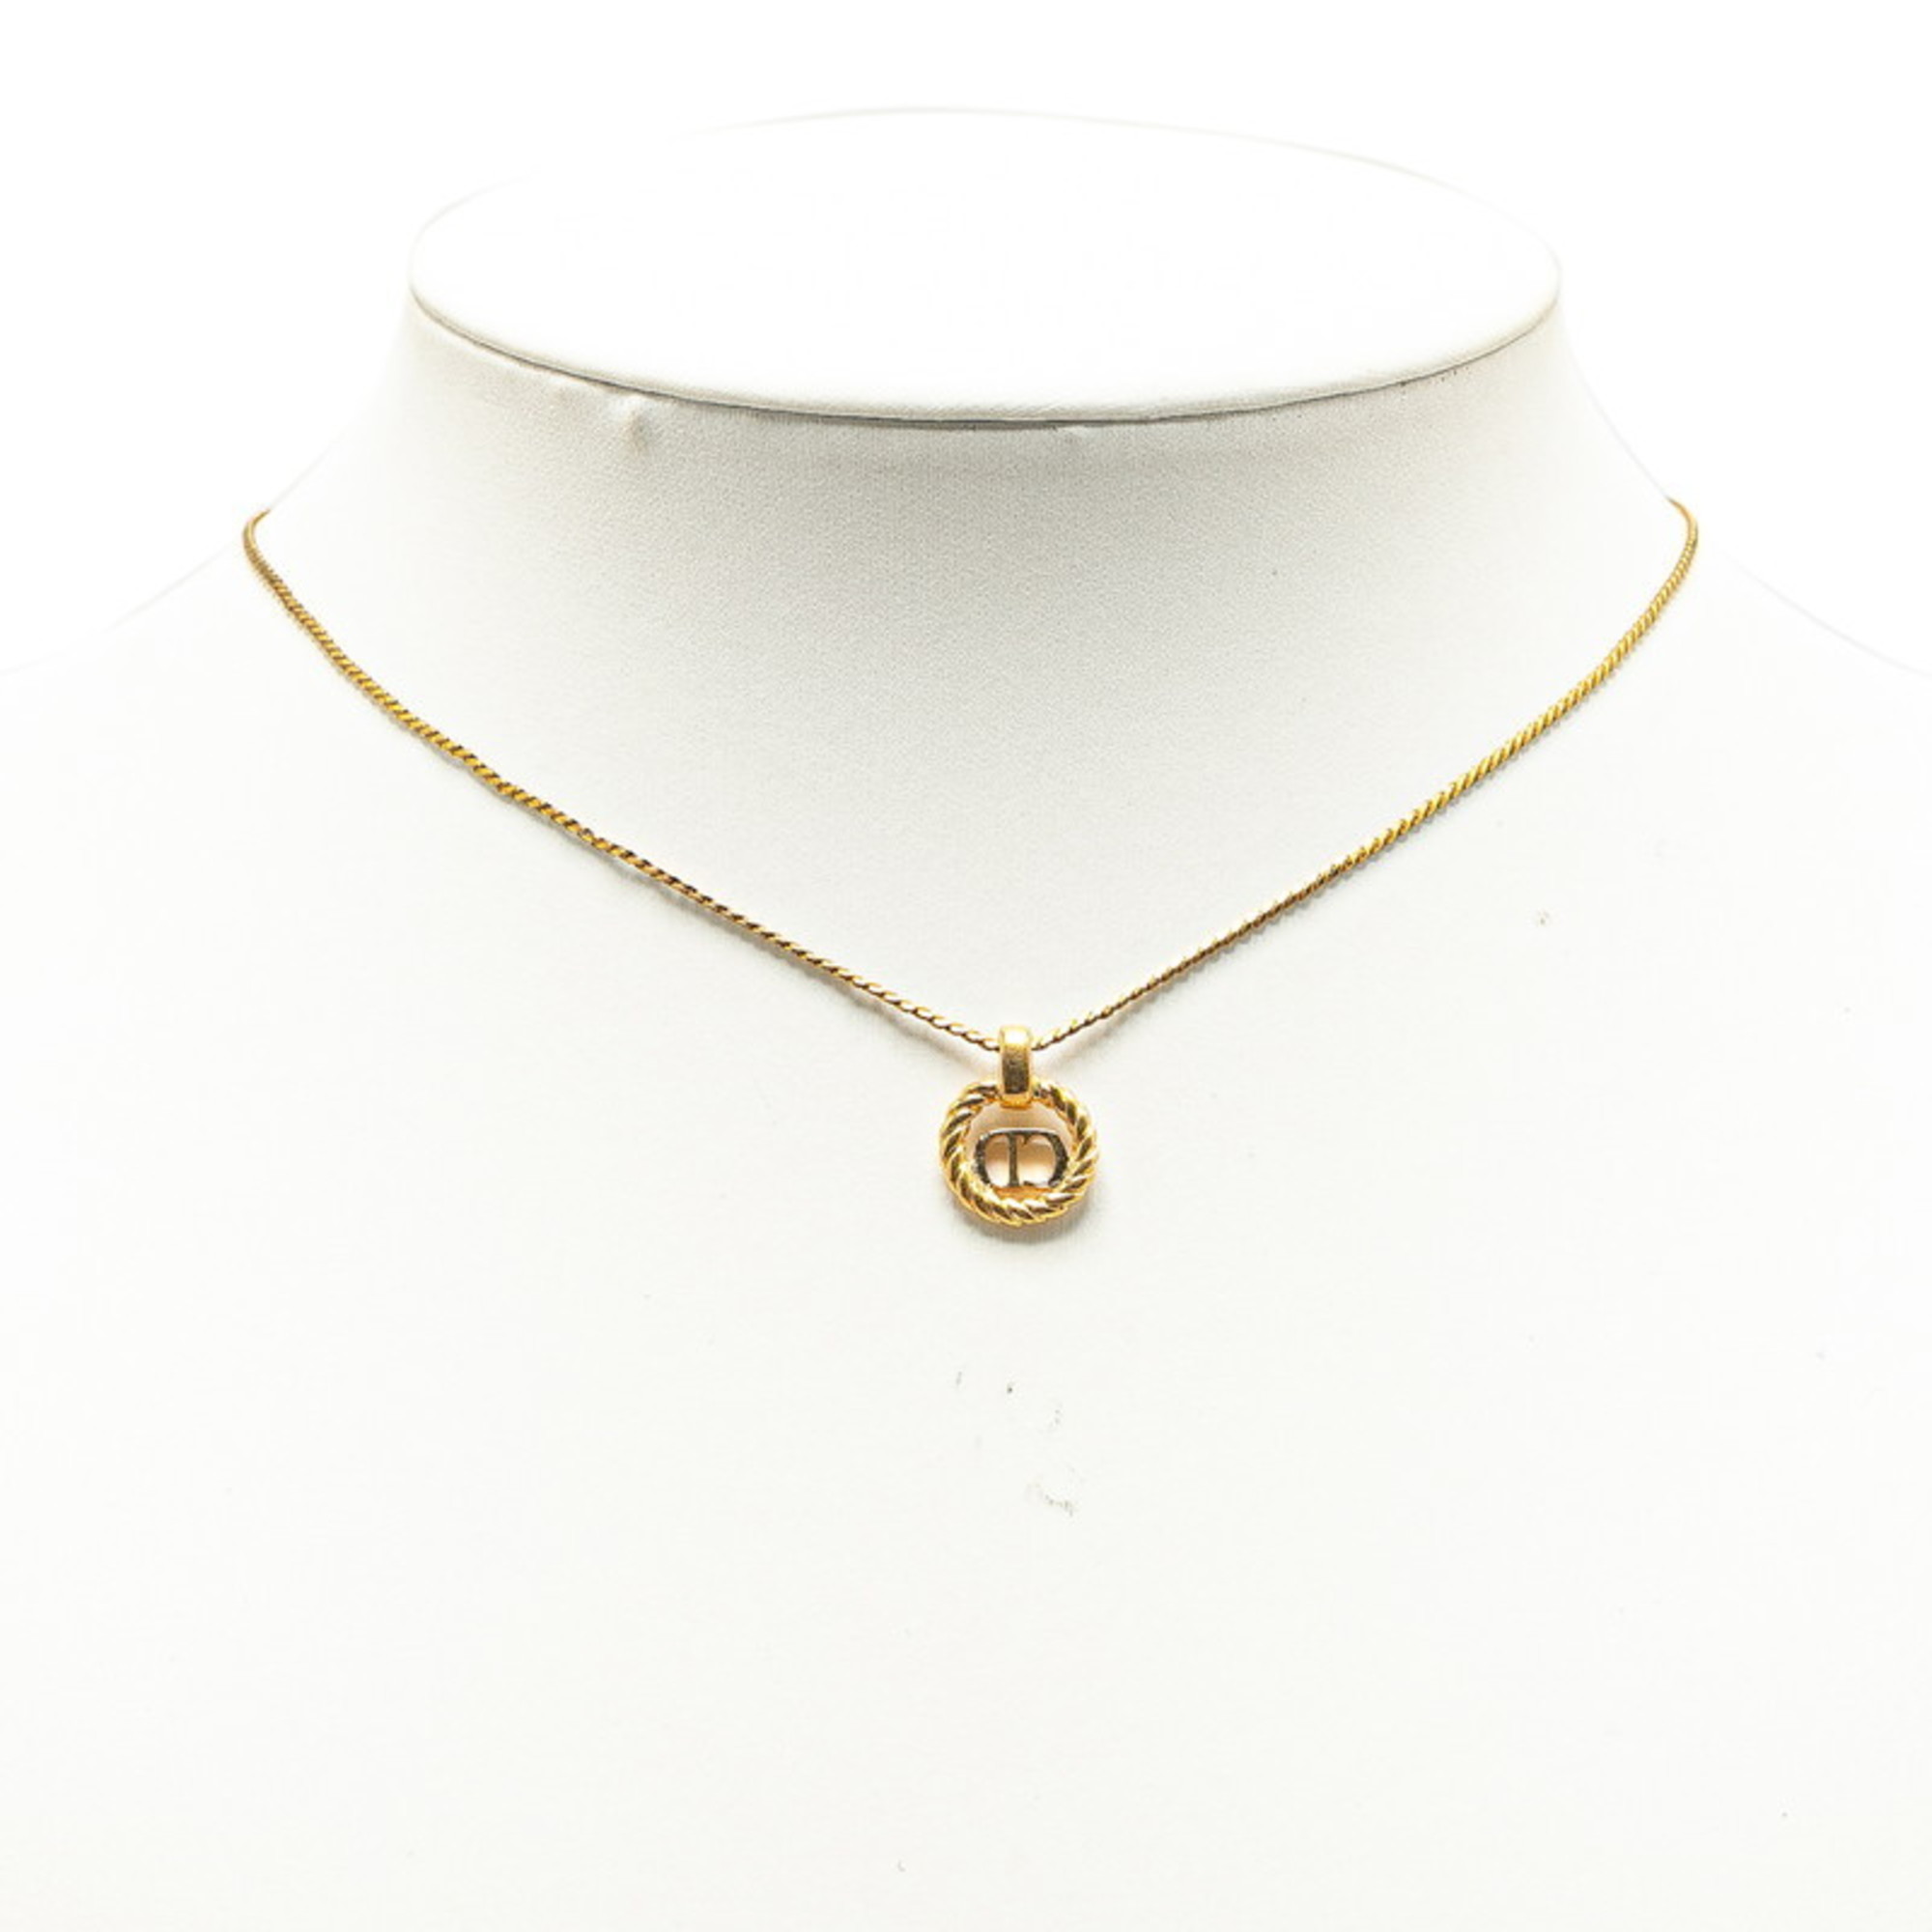 Christian Dior Dior CD Necklace Gold Plated Women's